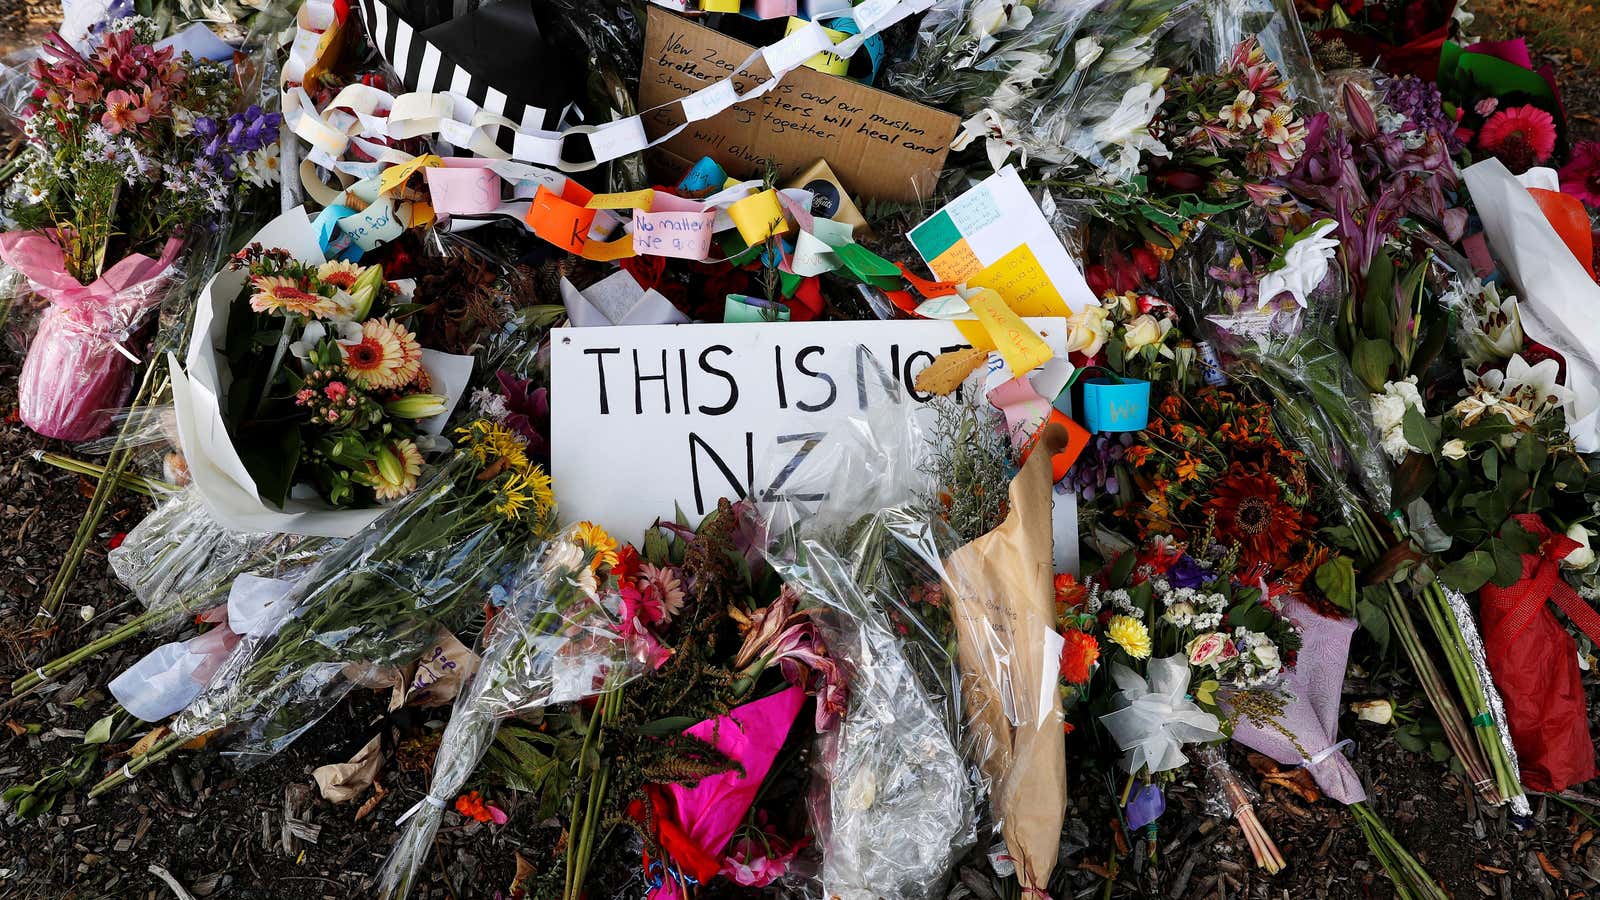 The shooter’s screed is now “officially objectionable” in New Zealand.